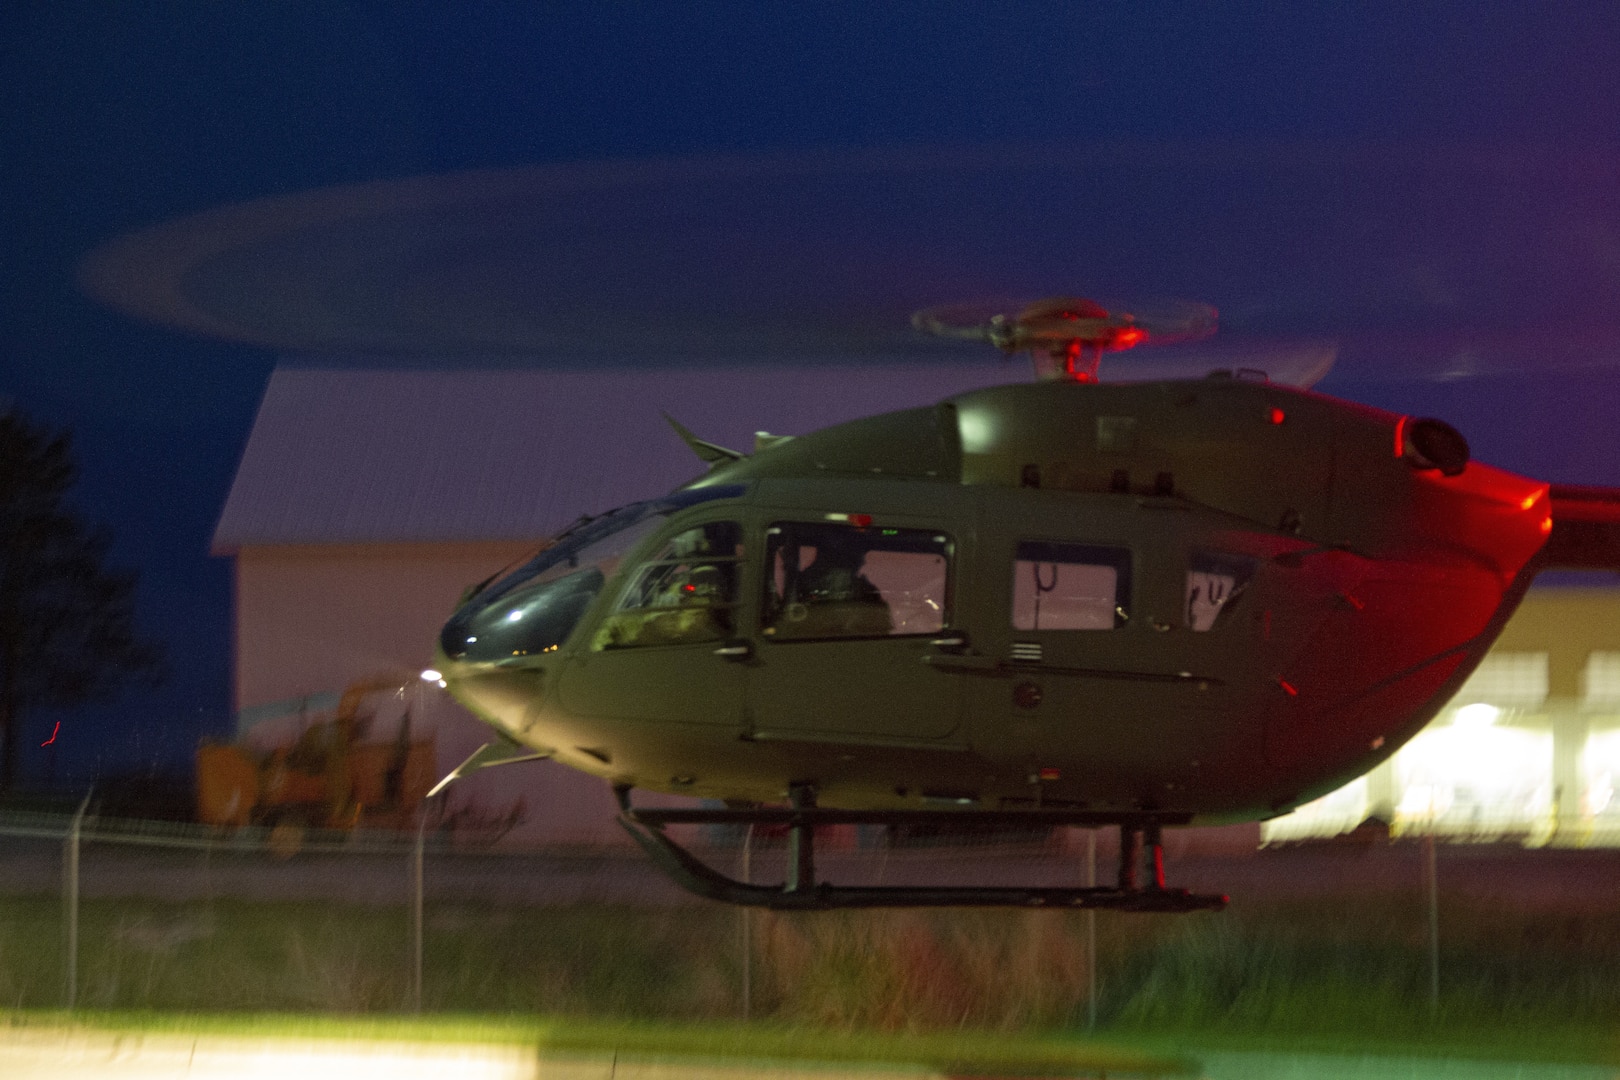 An Iowa Army National Guard UH-72 Lakota helicopter departs the Iowa National Guard Readiness Center in Iowa City, Iowa, after transferring COVID-19 test kits May 4, 2020. The helicopter transported the test kits from a Test Iowa site in Sioux City to the State Hygienic Laboratory in Coralville, Iowa.